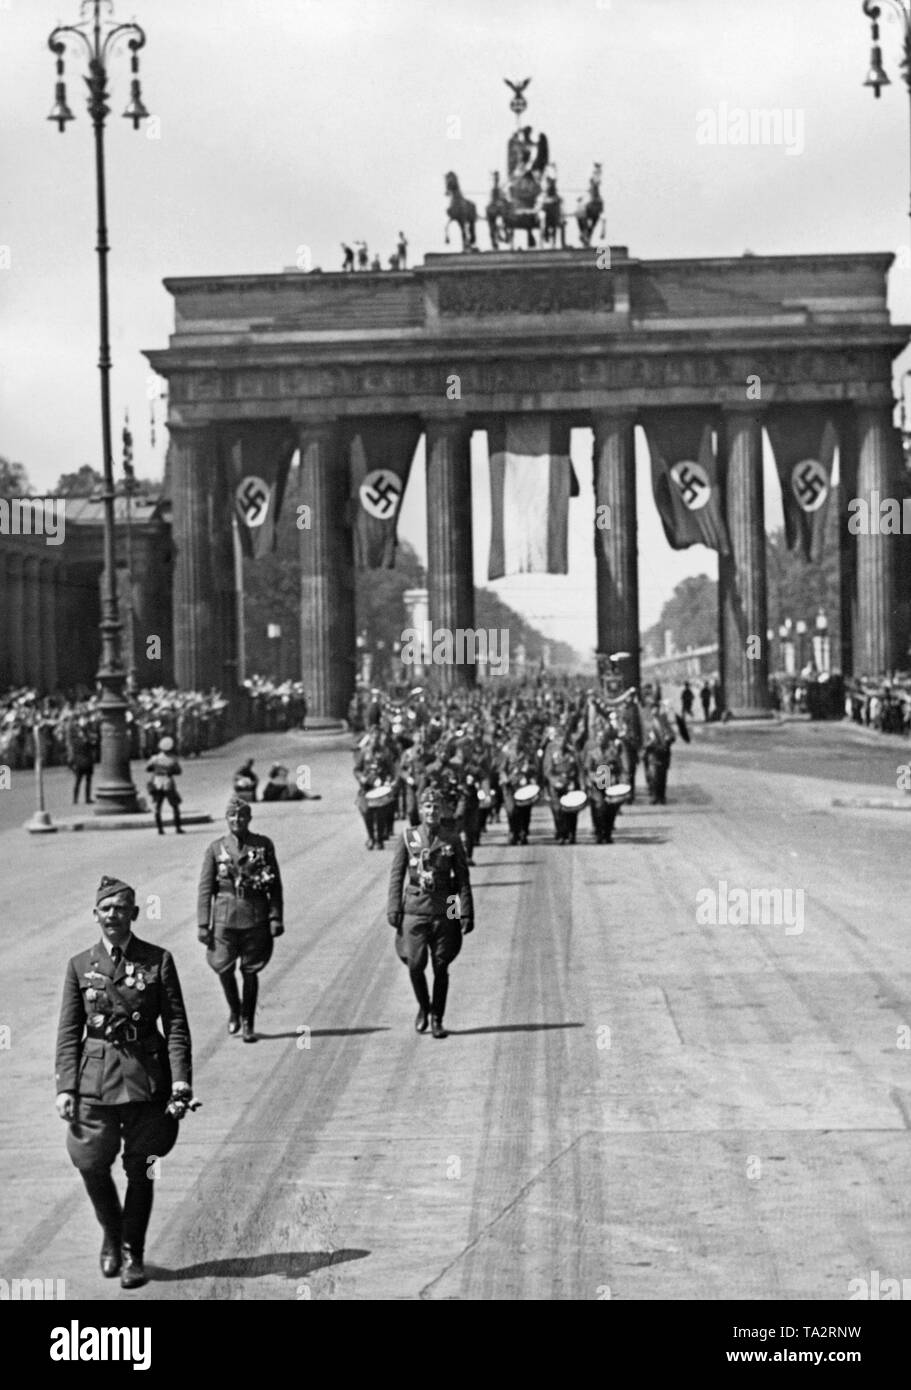 Photo of Major General Wolfram Freiherr von Richthofen (front left) at the forefront of his troop during their march across the Pariser Platz (Unter den Linden) to the East towards Lustgarten on the occasion of the parade on the return of the Condor Legion from Spain on the 6th of June, 1939. In the background, the Brandenburg Gate with swastika flags and the Spanish Bandera. On the horizon the East-West Axis (former Charlottenburger Chaussee). Stock Photo